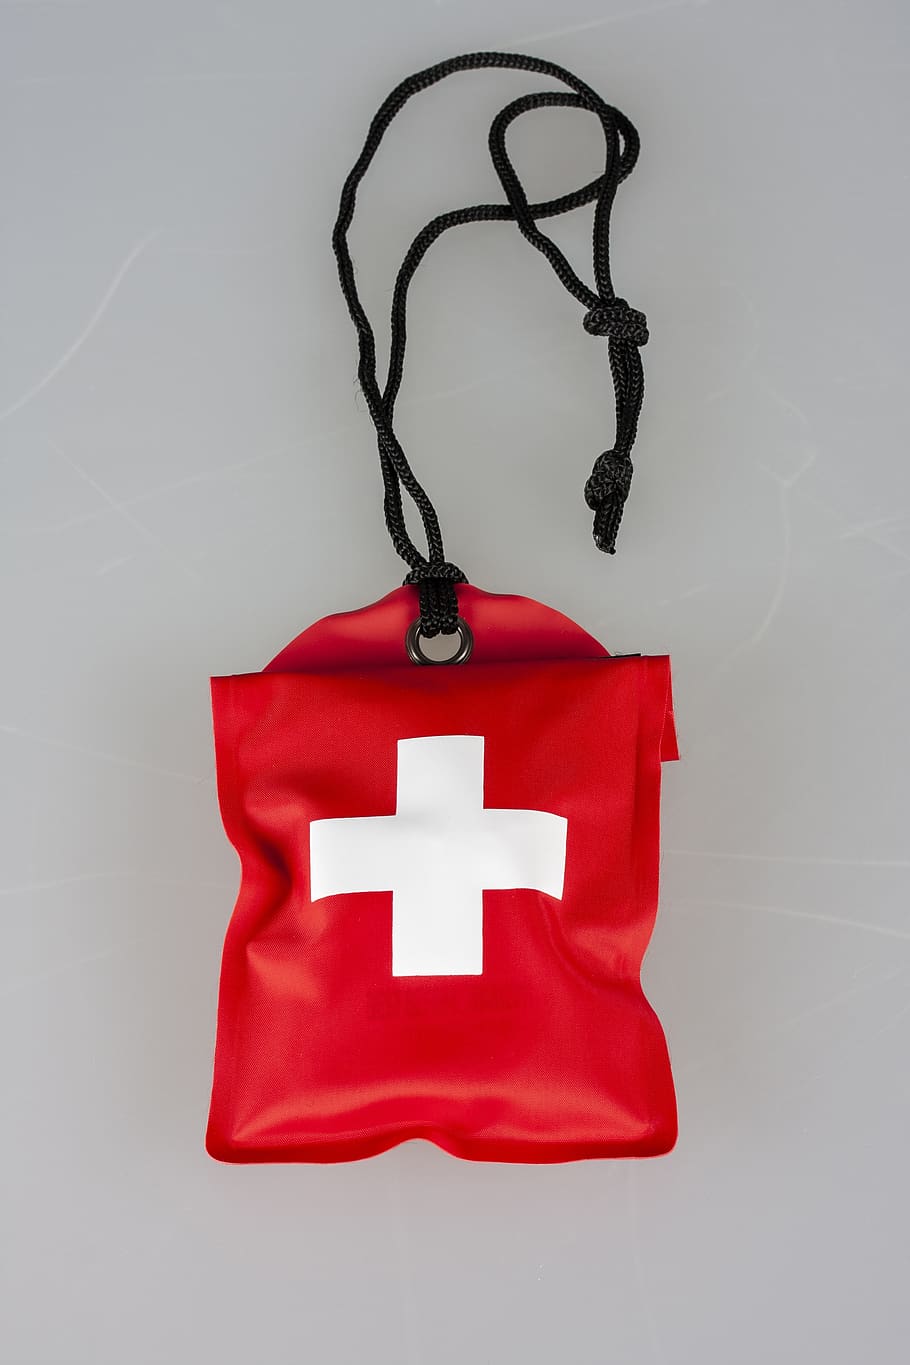 first aid, emergency, help, medical, recovery, accident, doctor, health, medicine, hospital